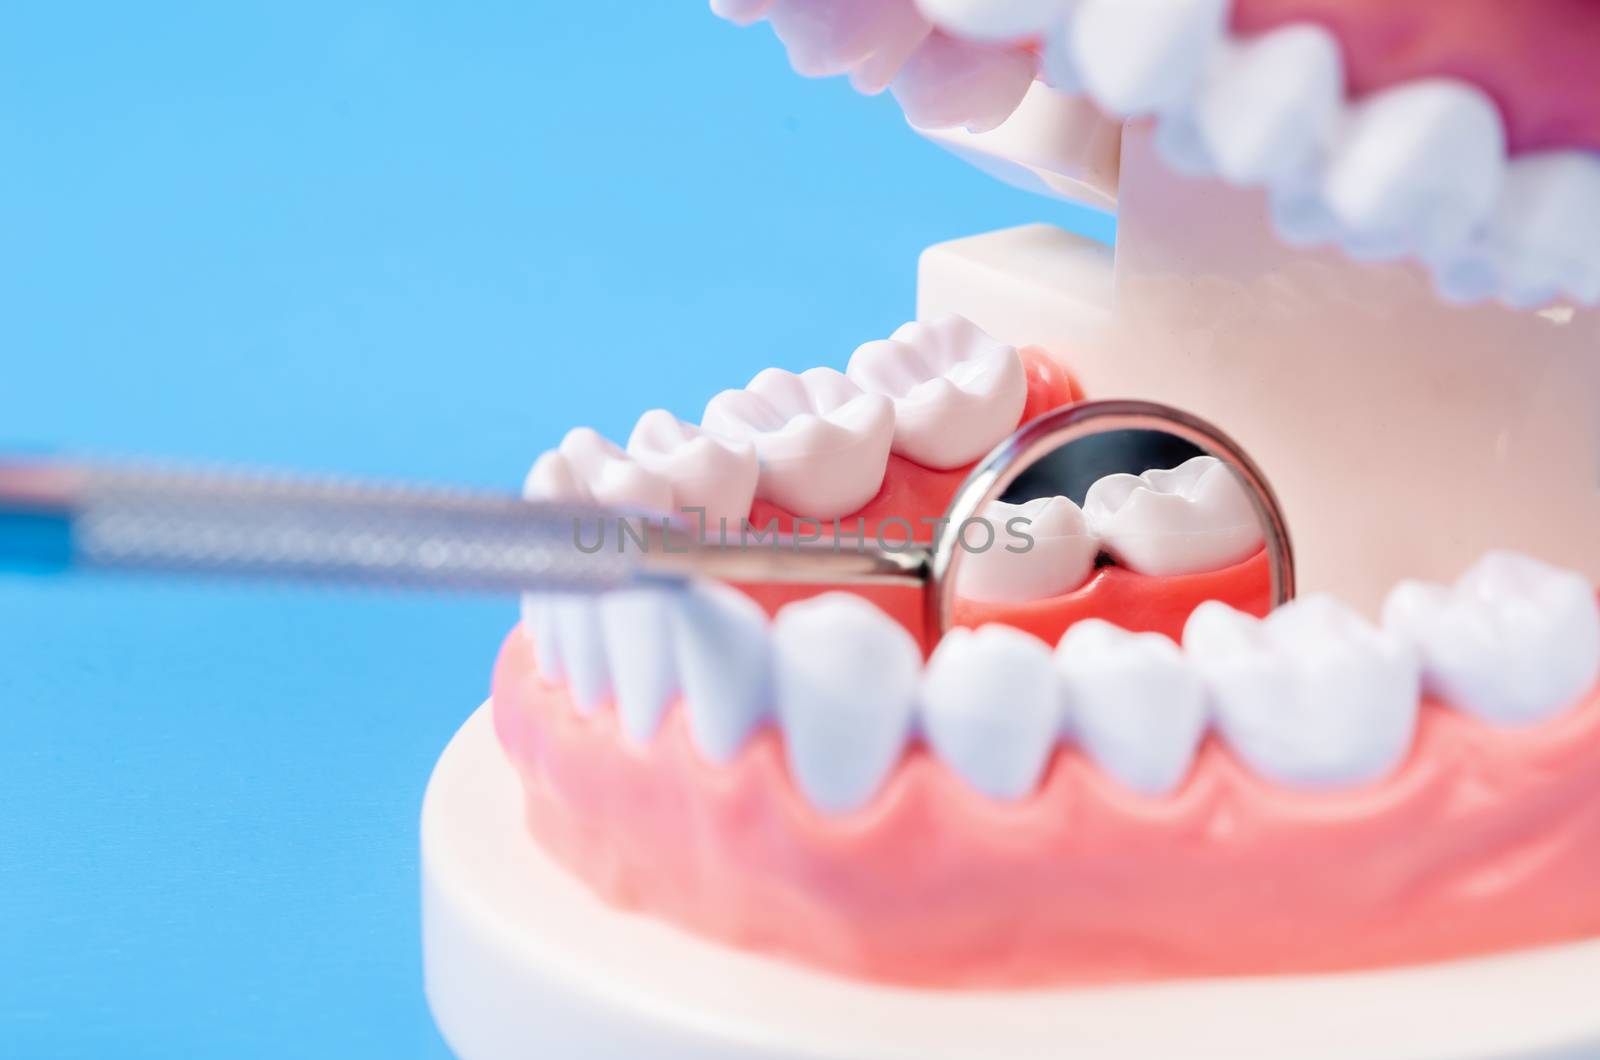 Tooth dental caries on denture with equipment dental on blue background.